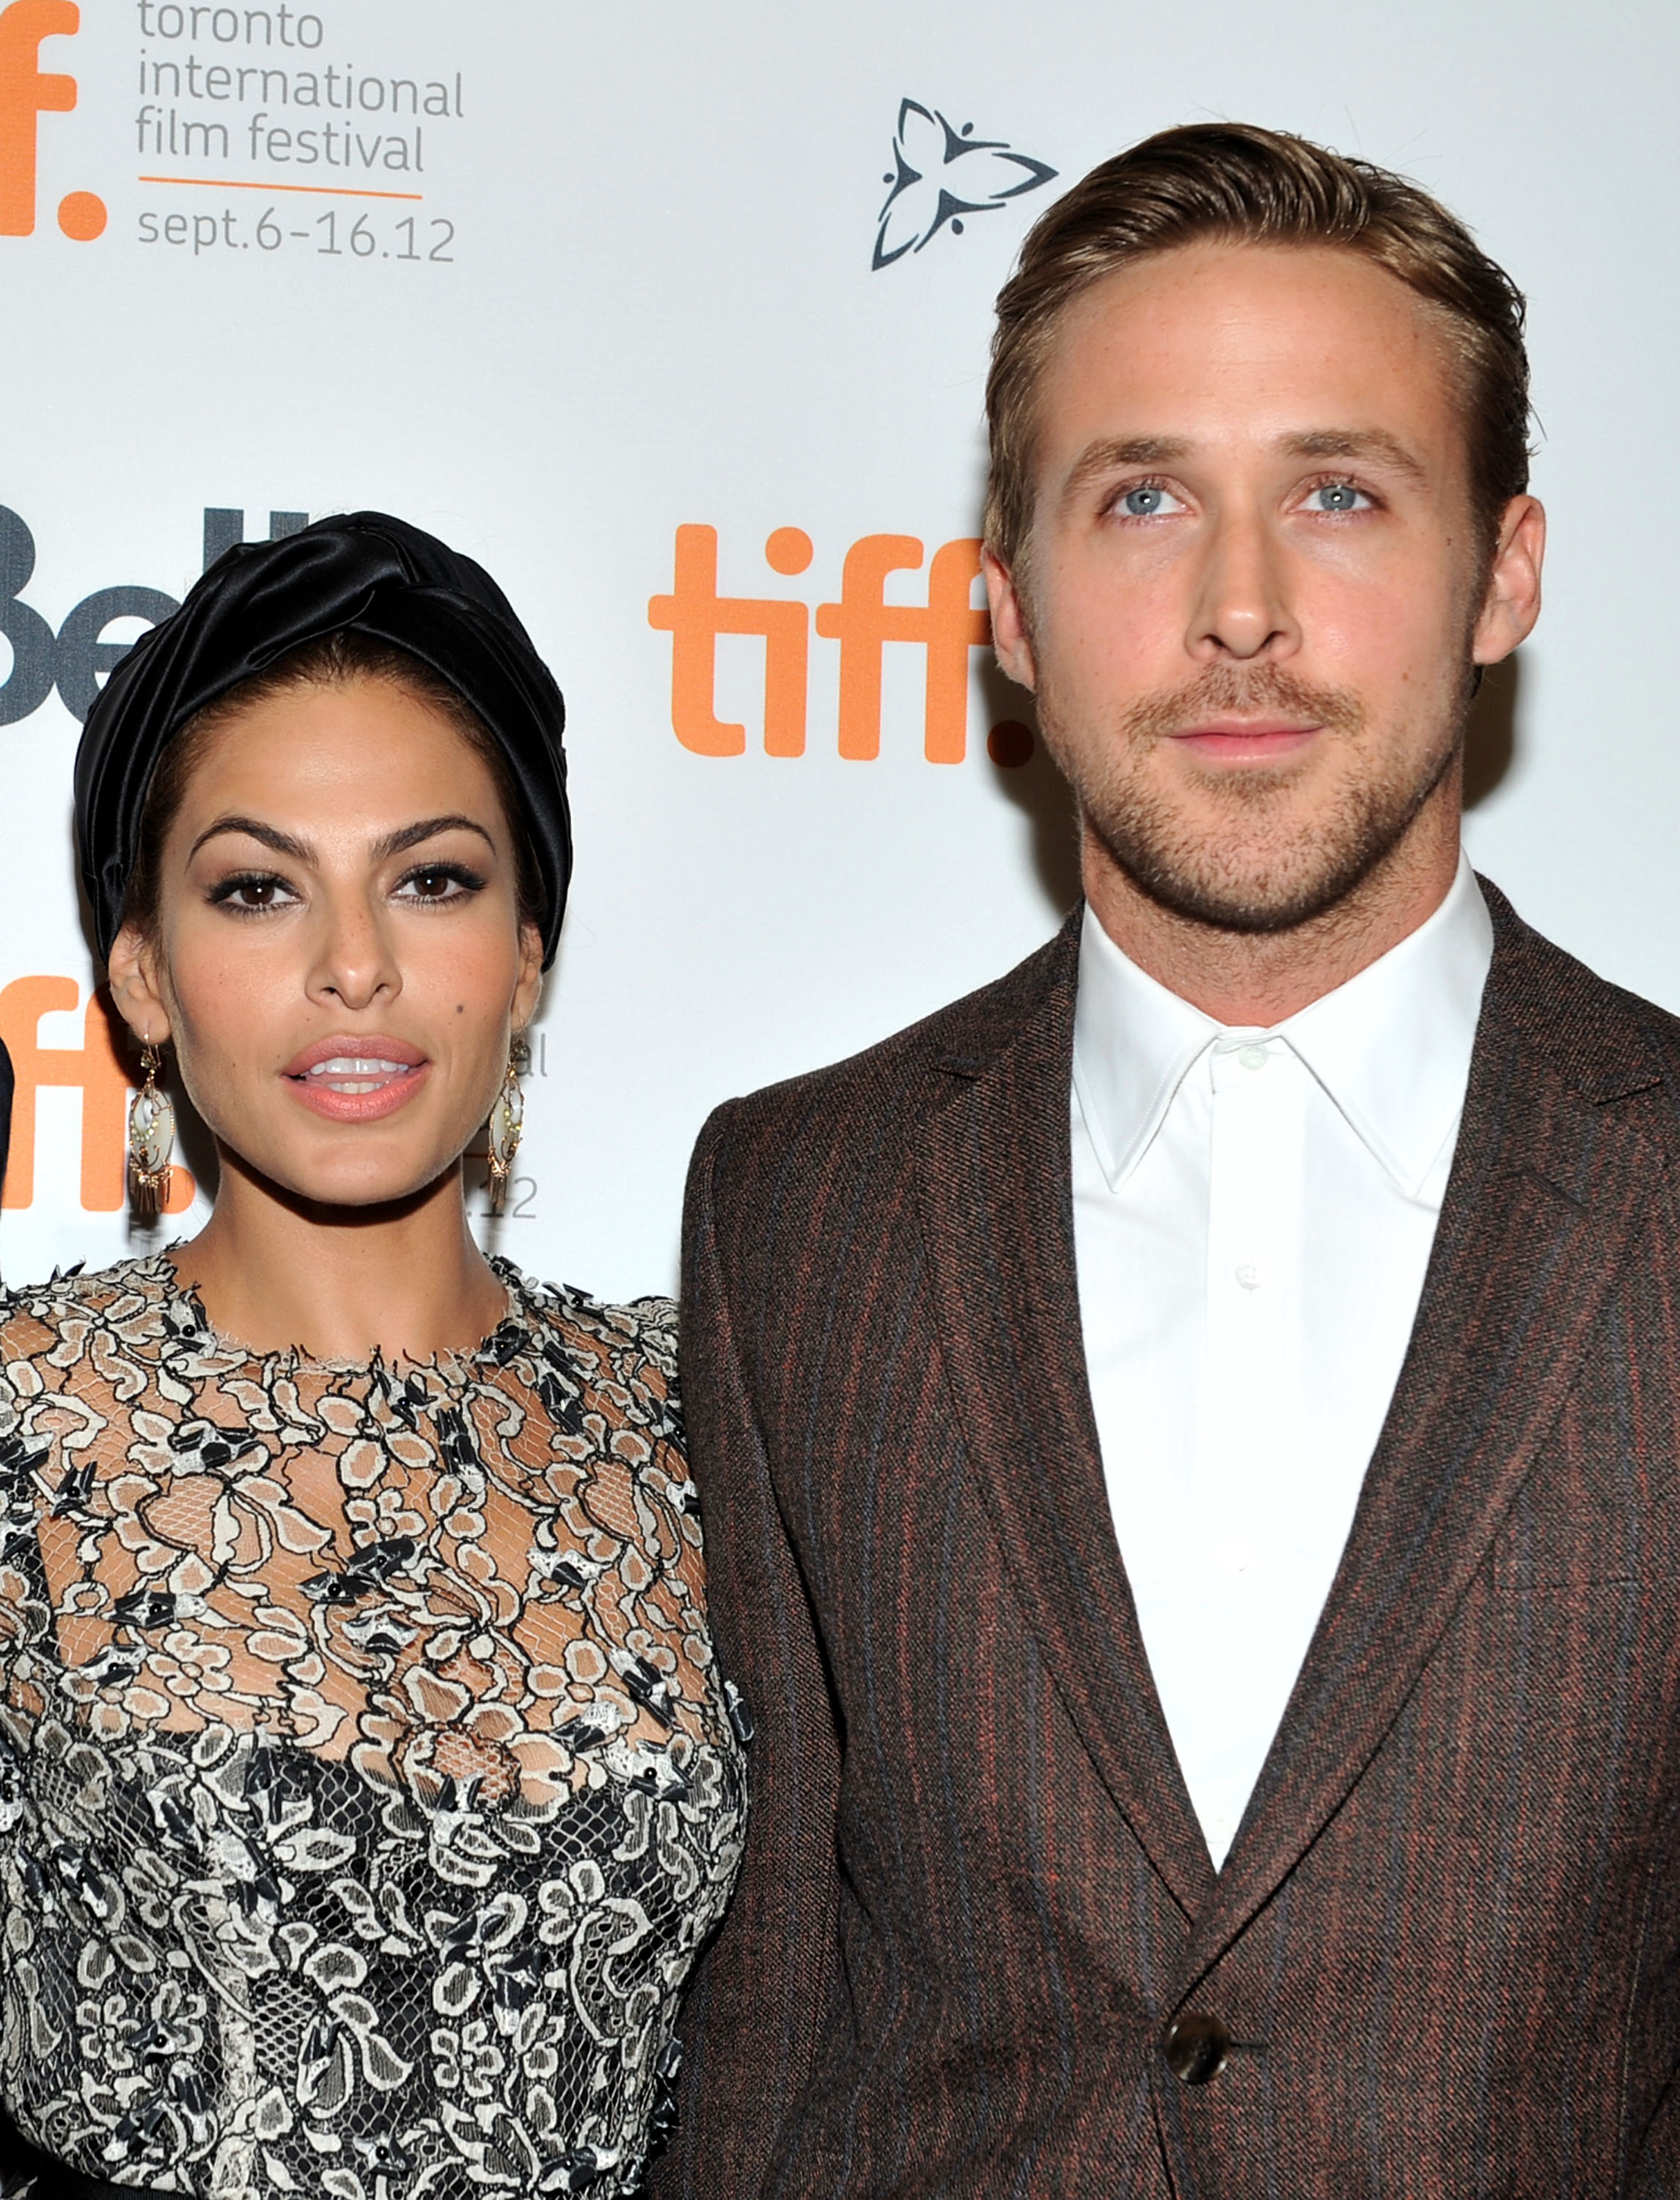 Eva and Ryan posing together, dressed in formal attire, at the TIFF event